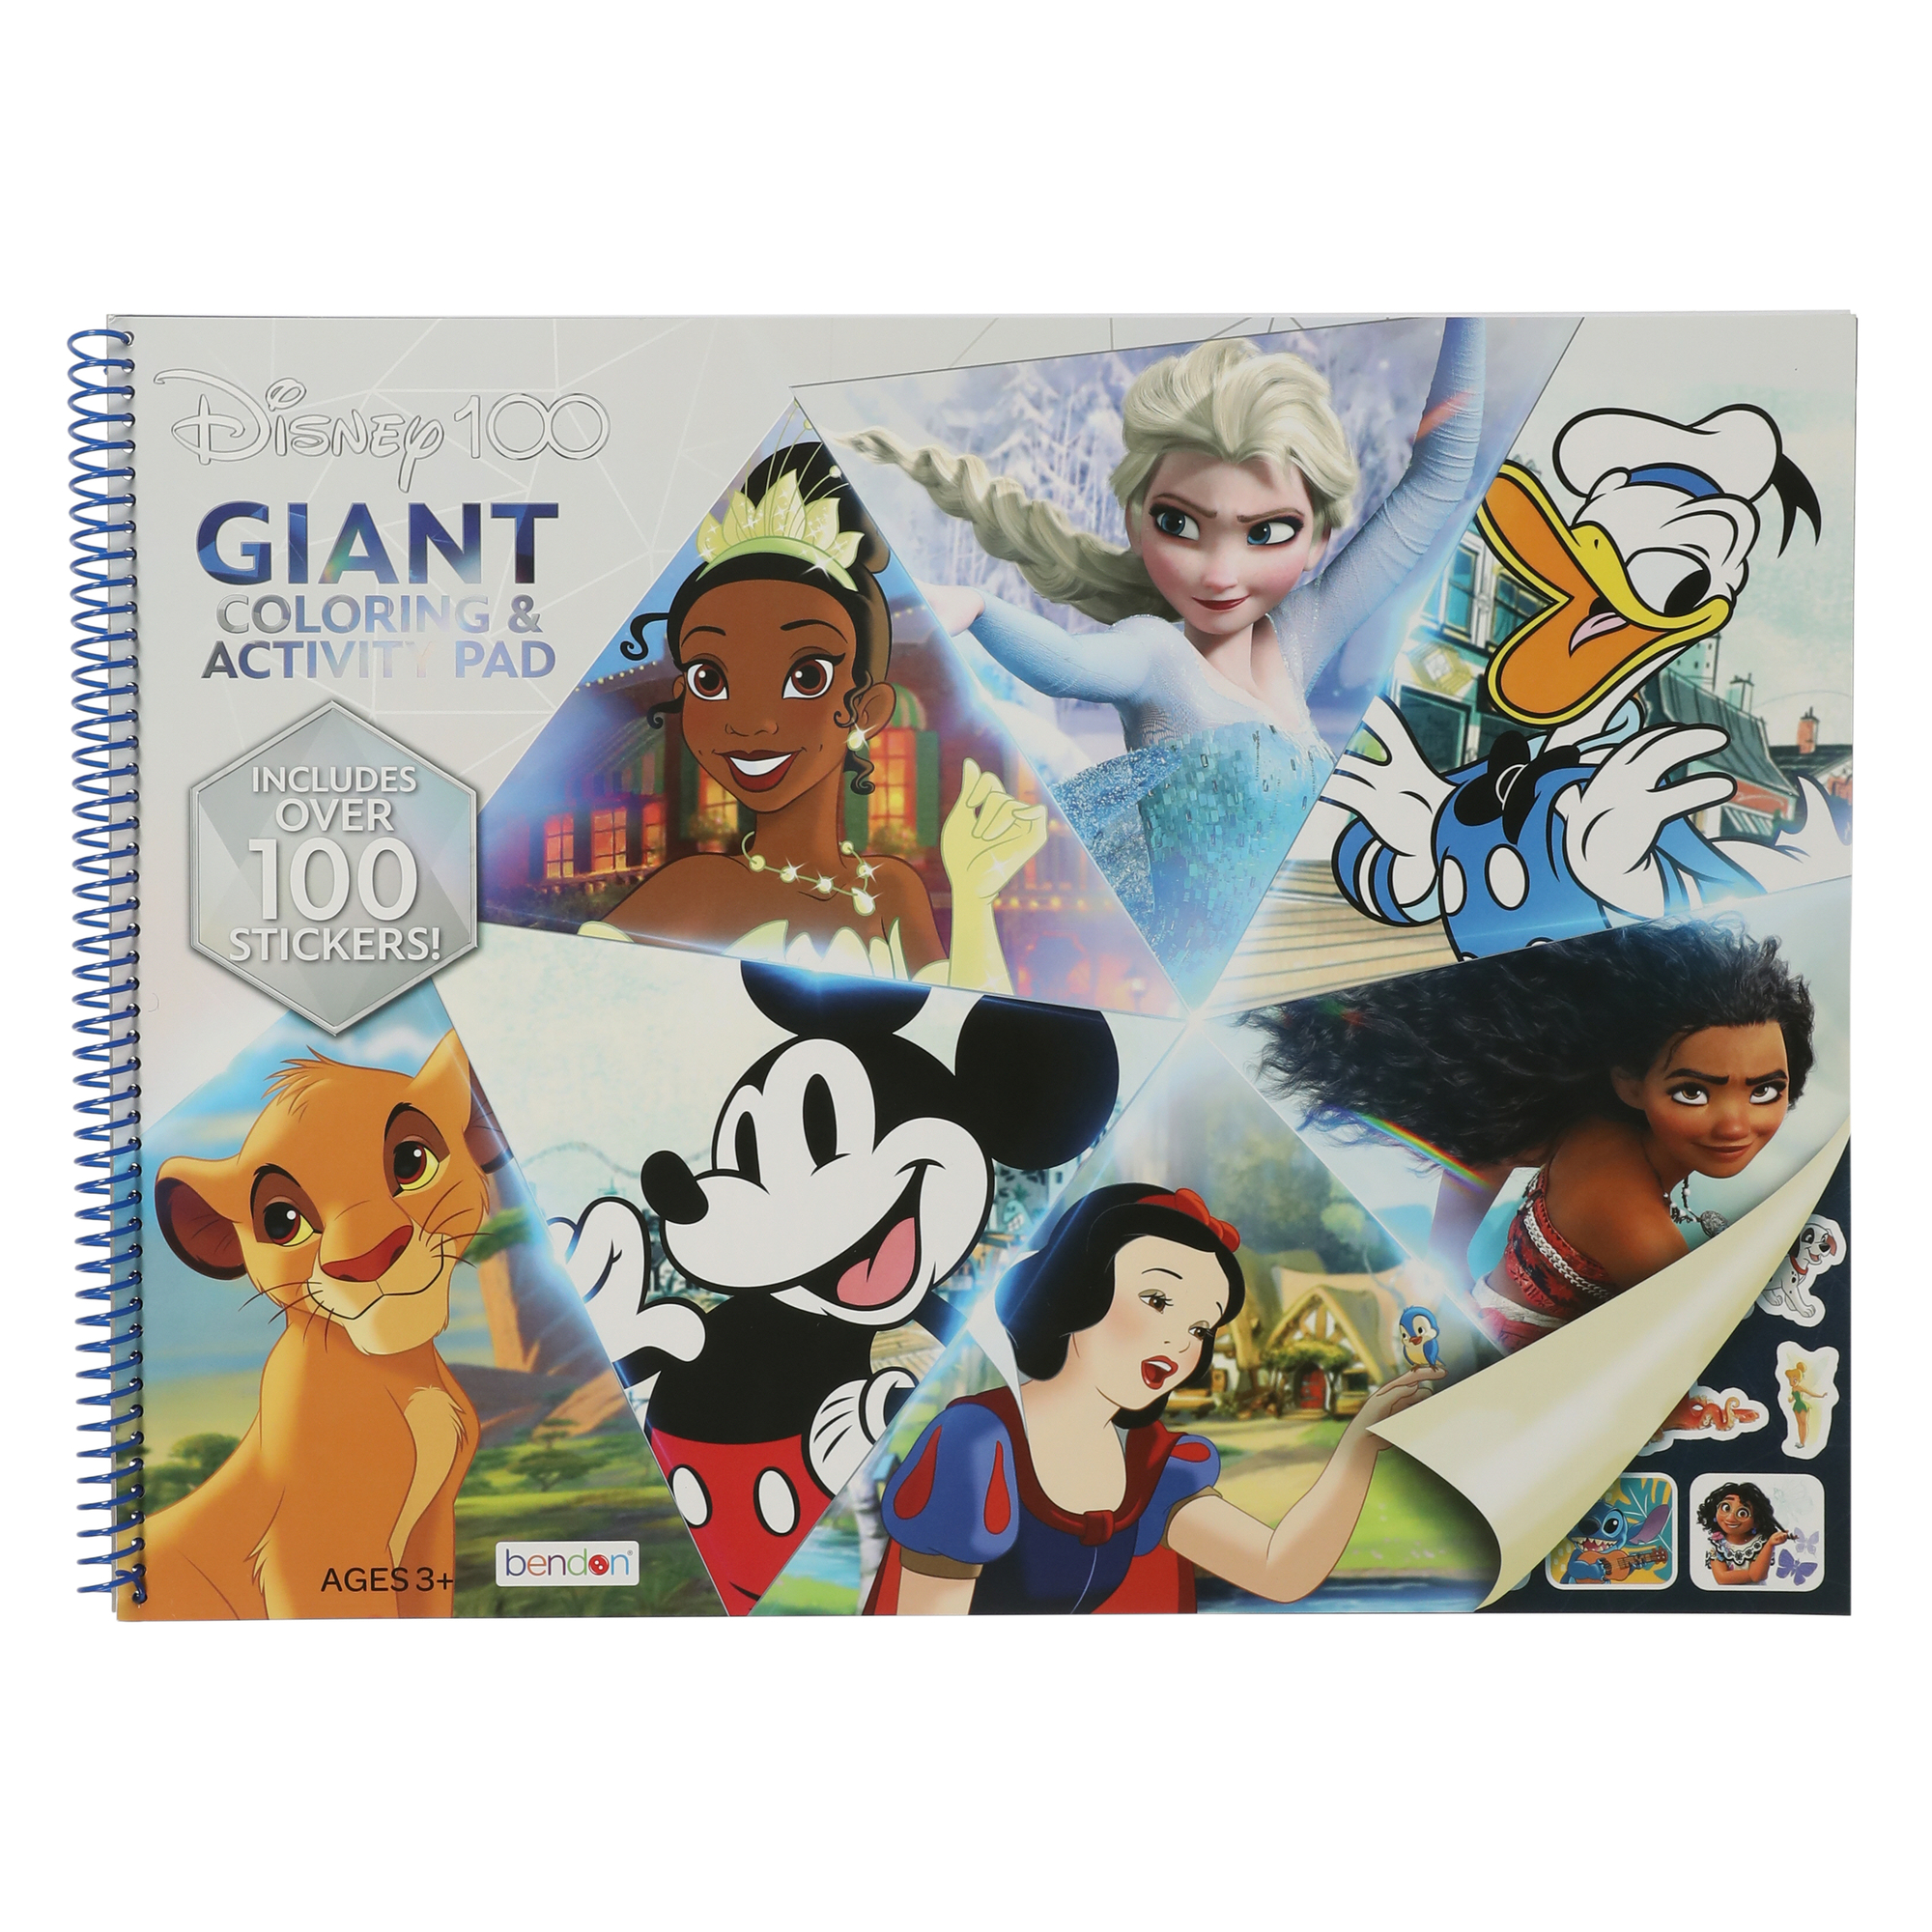 Disney 100 giant coloring & activity pad